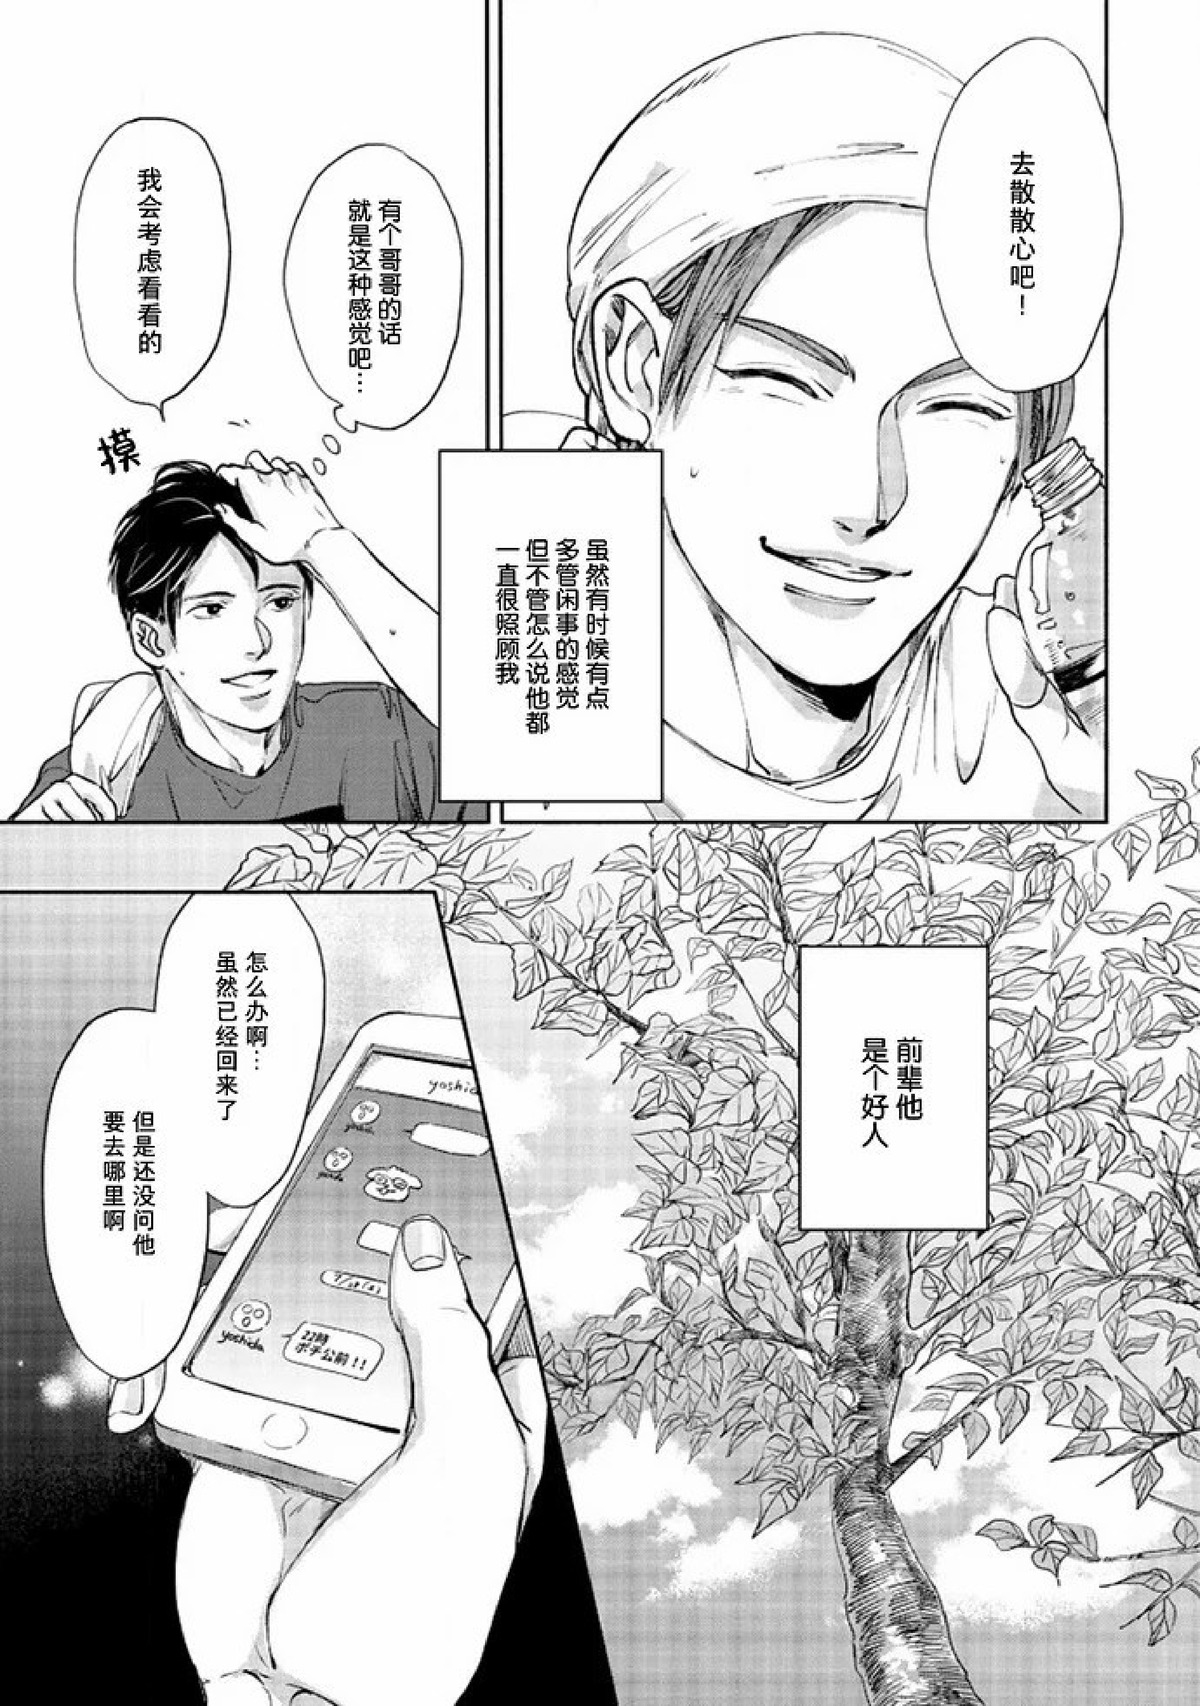 【Two sides of the same coin[耽美]】漫画-（上卷01-02）章节漫画下拉式图片-25.jpg